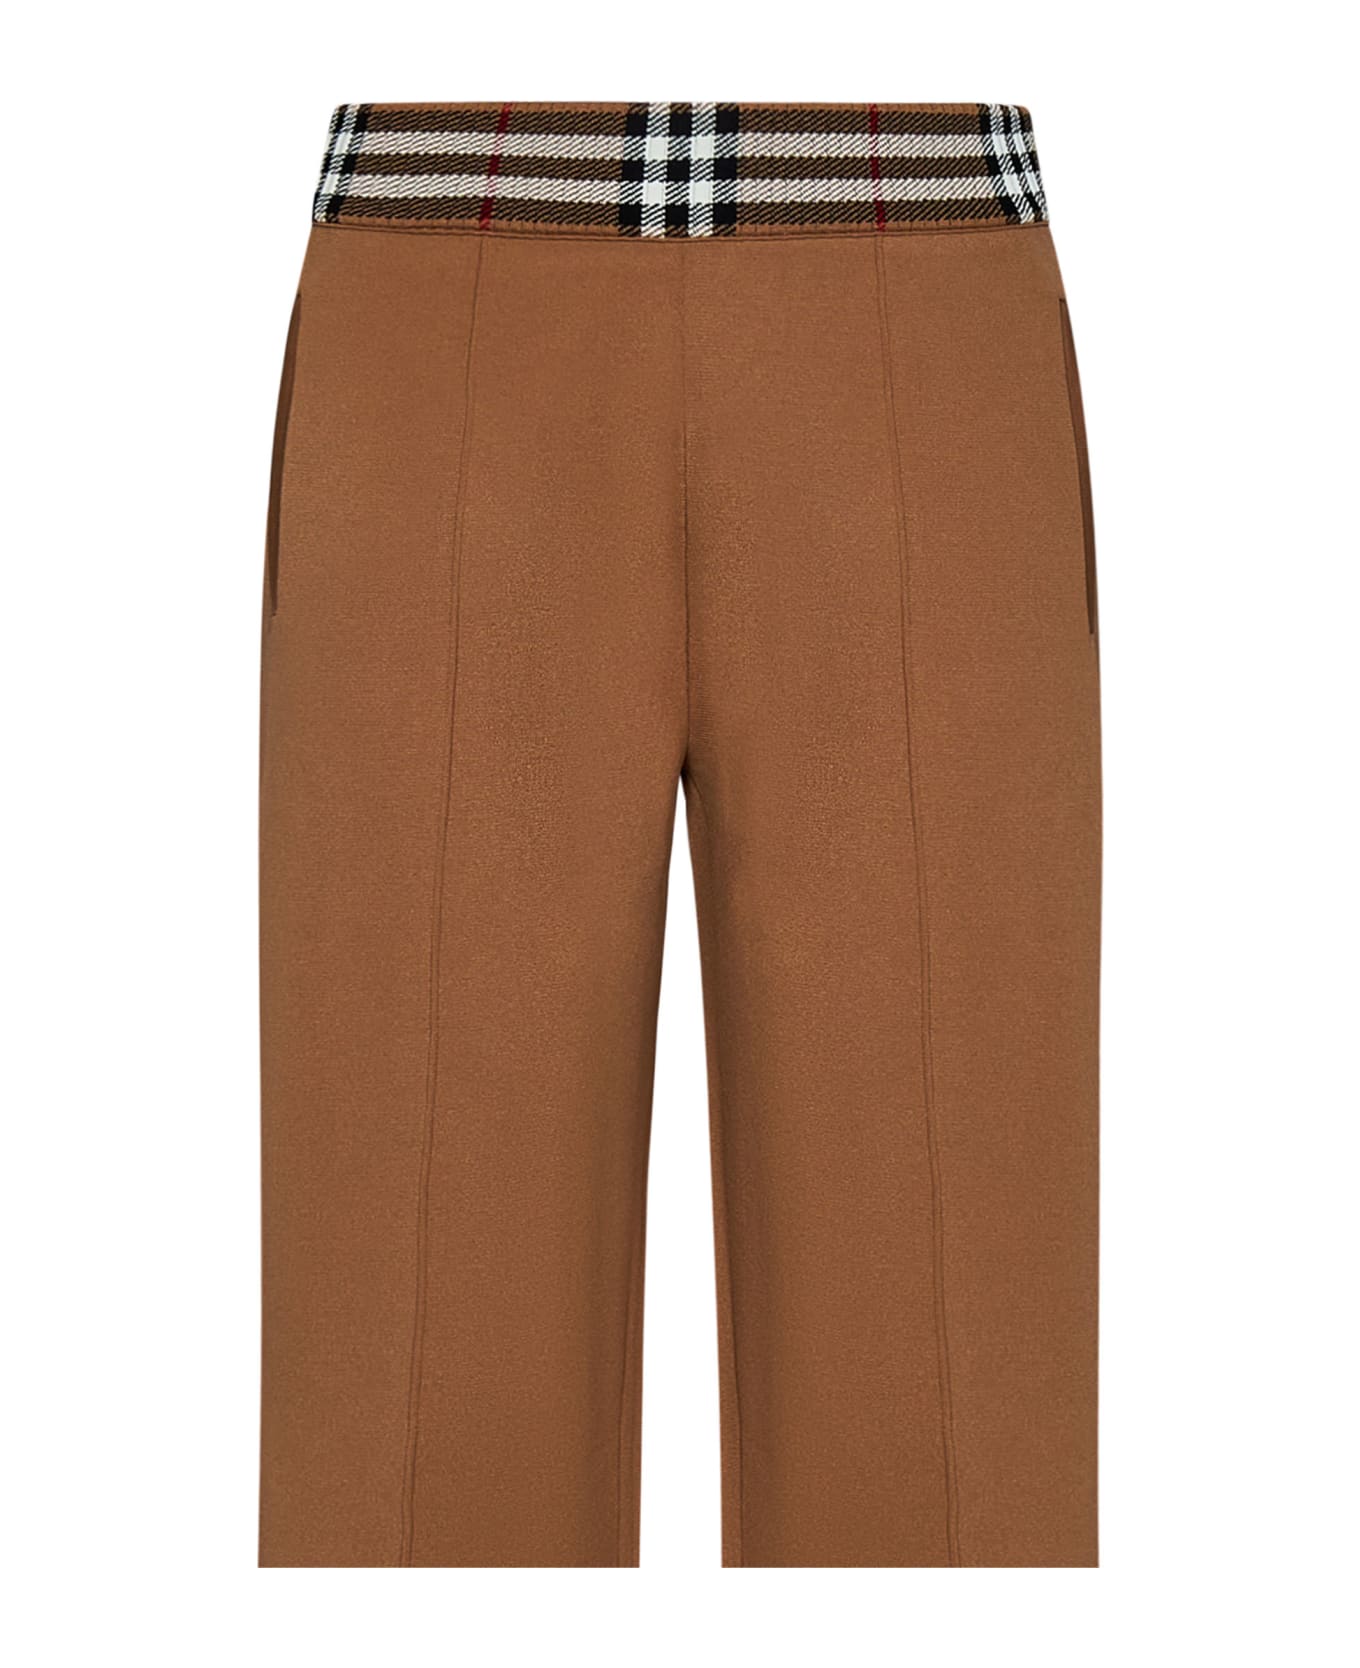 Burberry Trousers - Beige